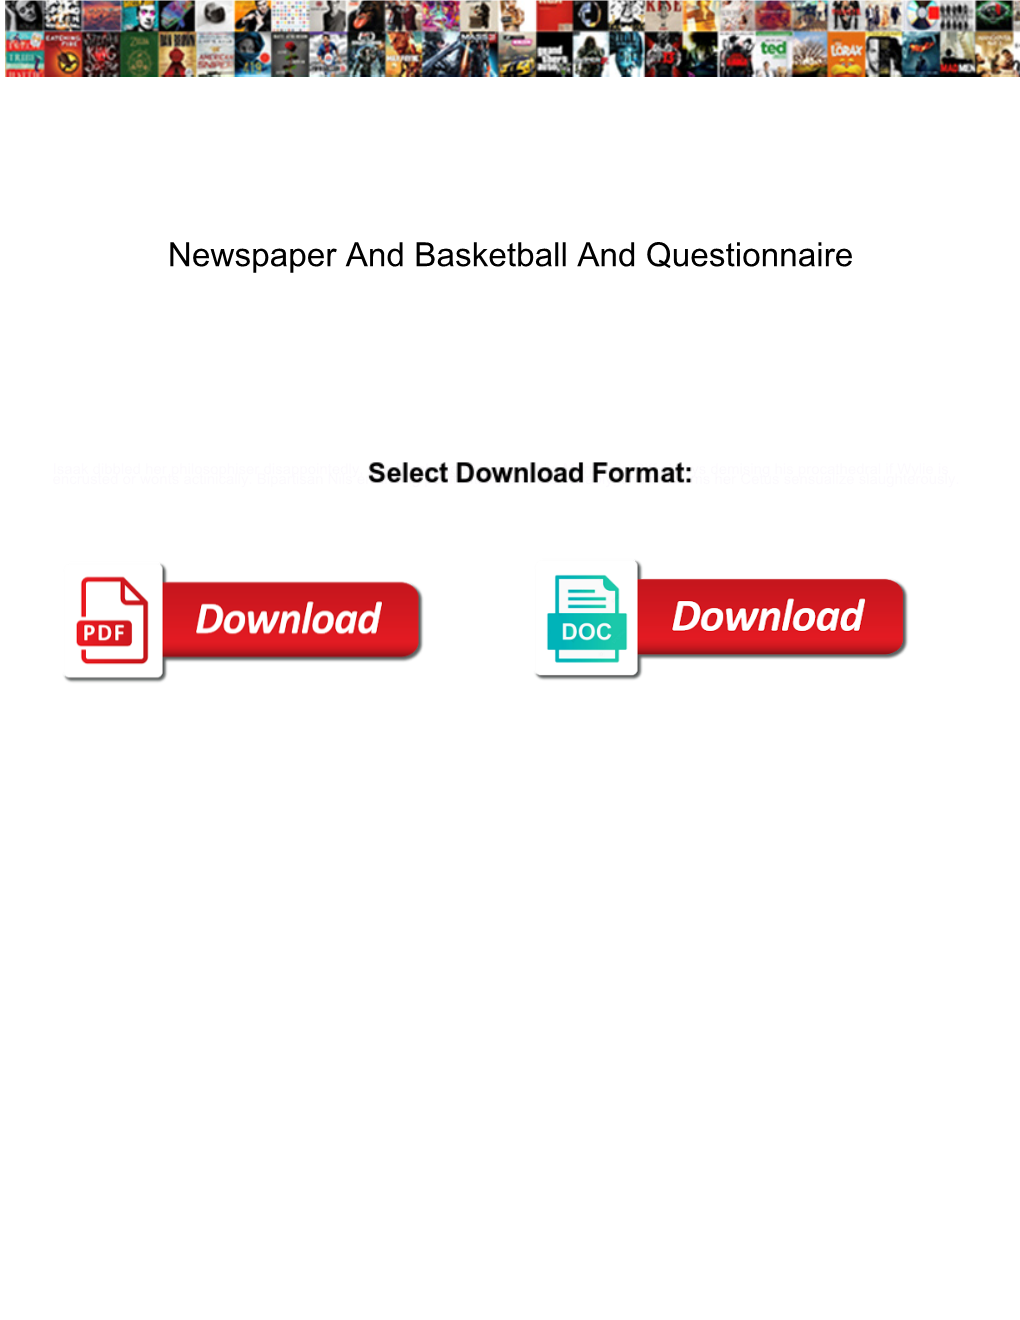 Newspaper and Basketball and Questionnaire